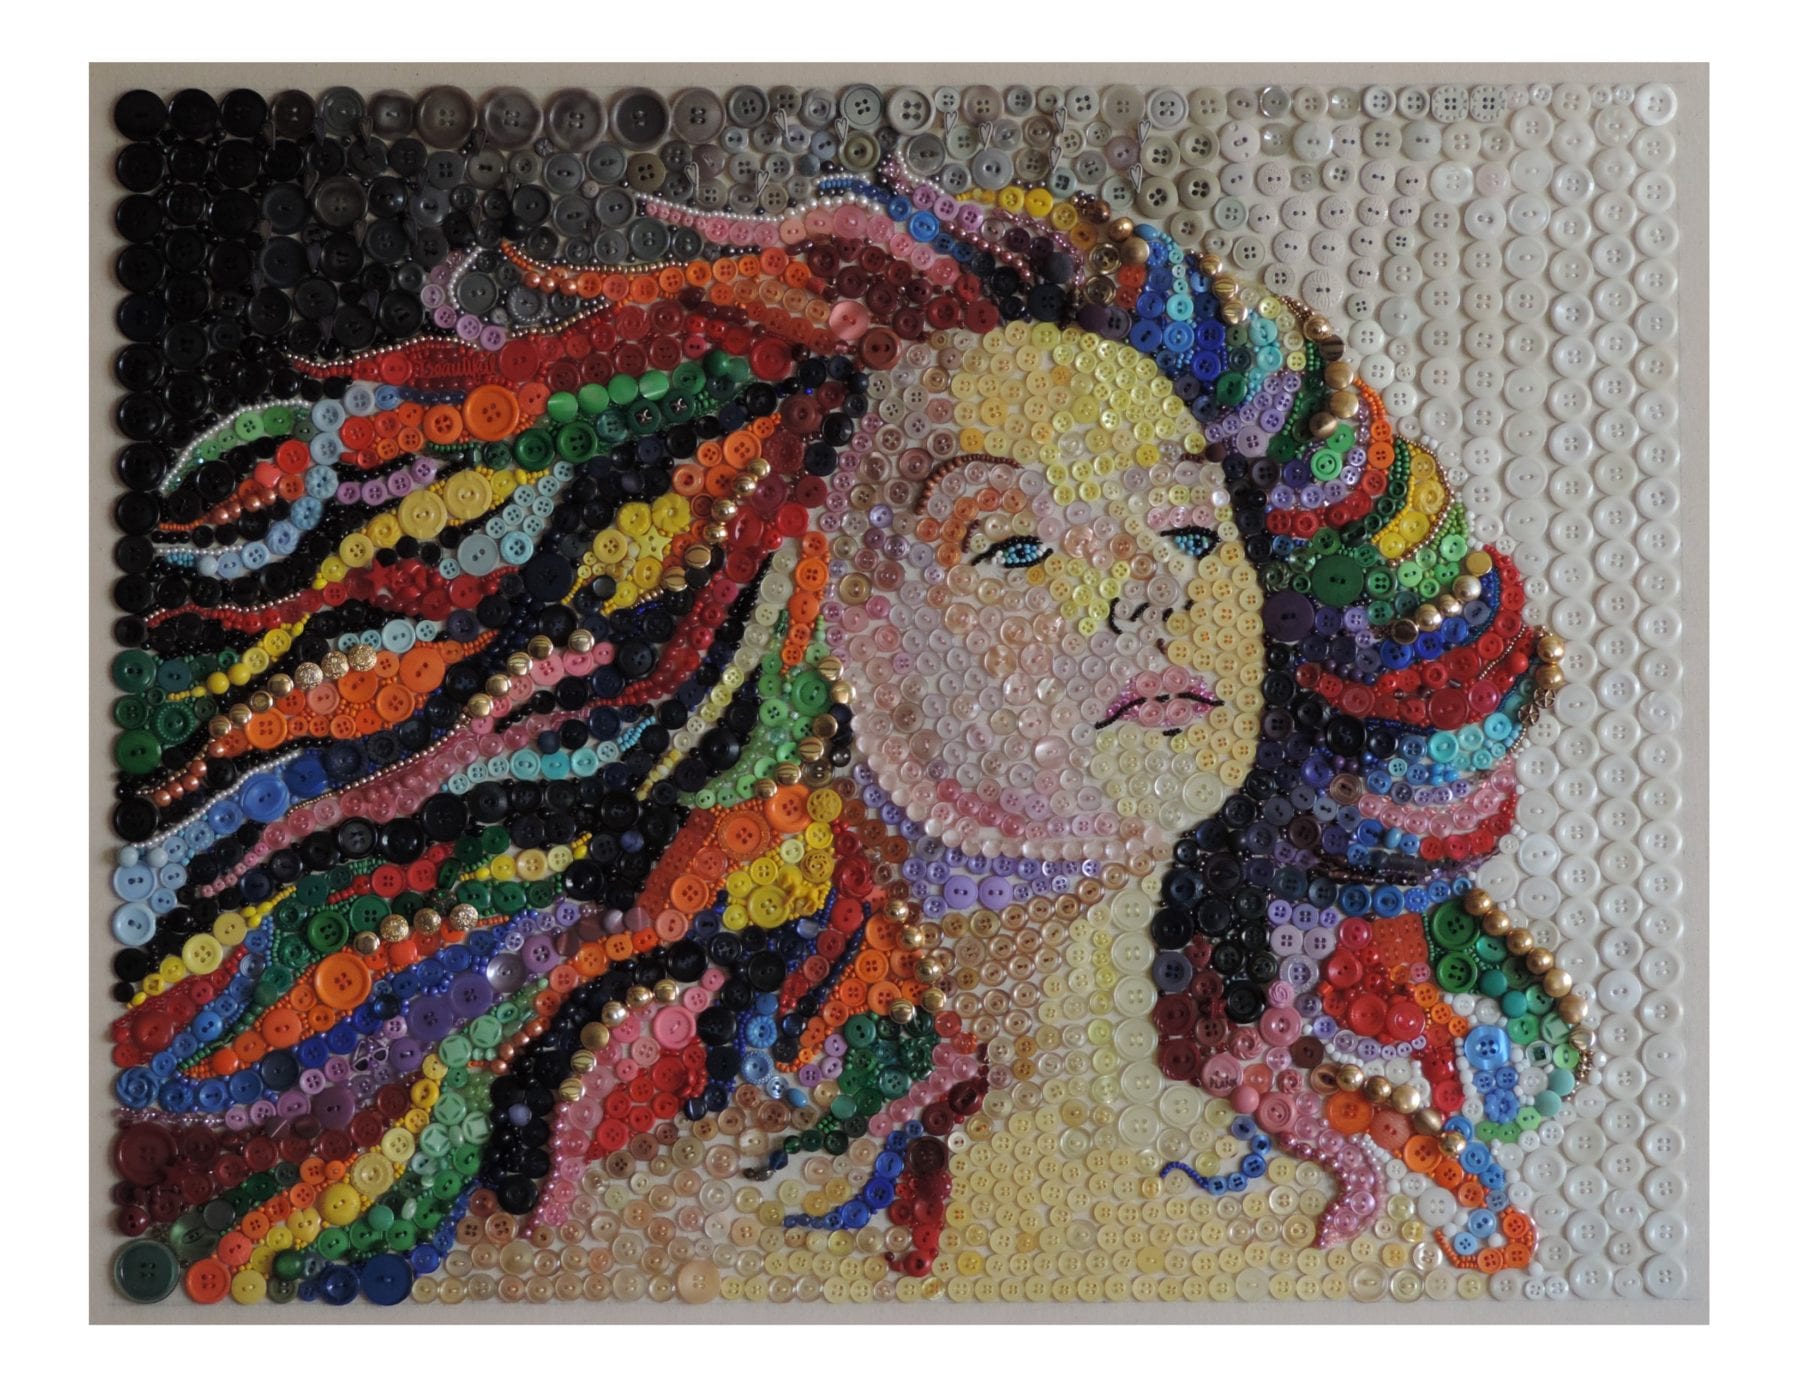 Helene Plank, Magical Muse, mixed media -- buttons and beads hand-sewn onto canvas, 24 x 30 inches